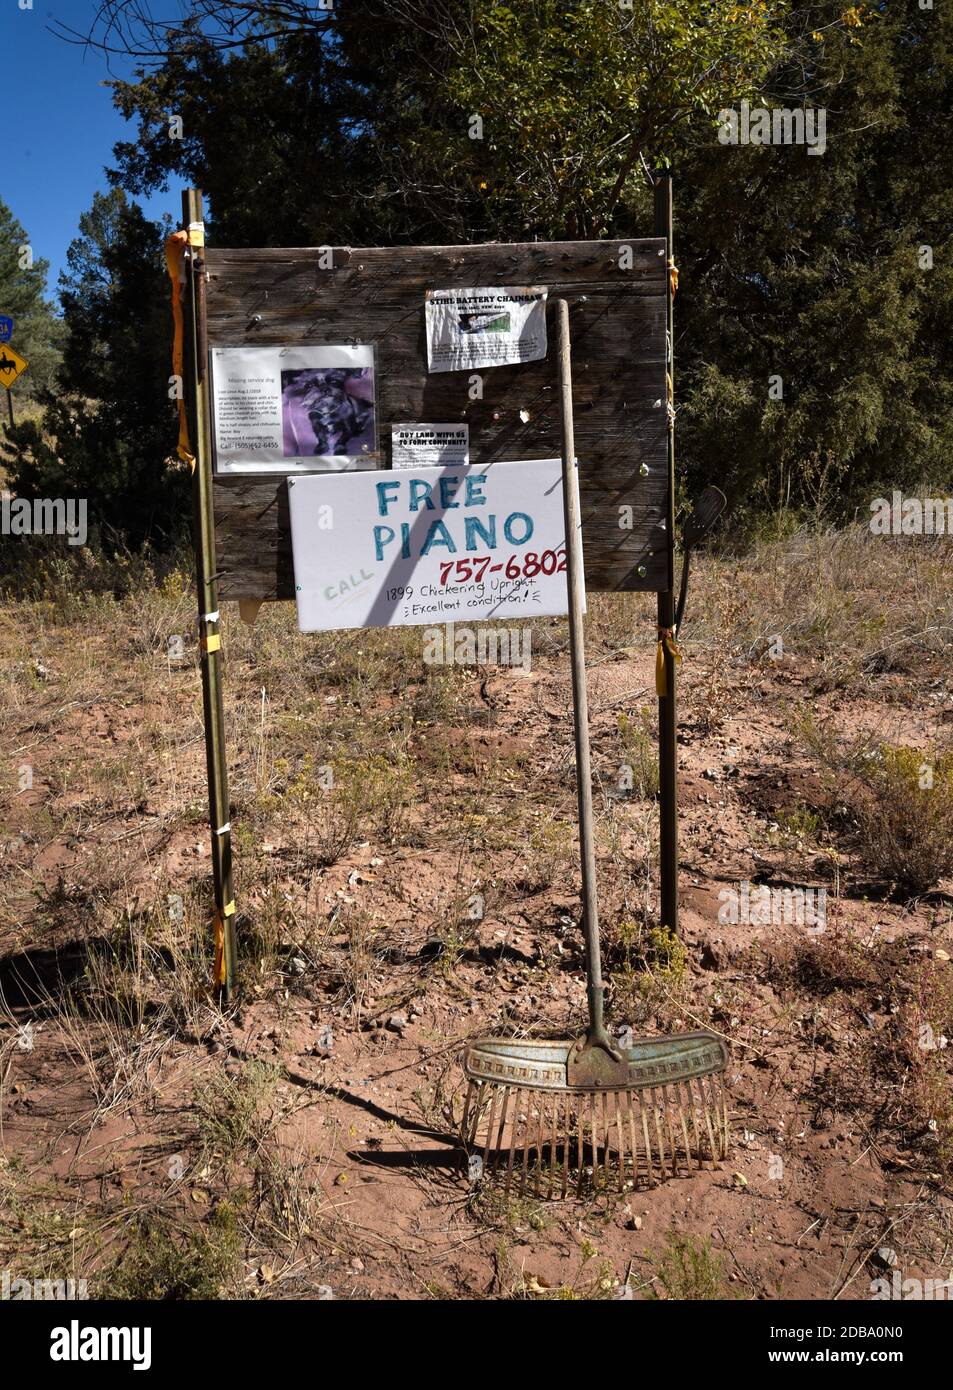 A sign at a rustic community bulletin board beside a road in Pecos, New Mexico, offers a free piano to a good home. Stock Photo